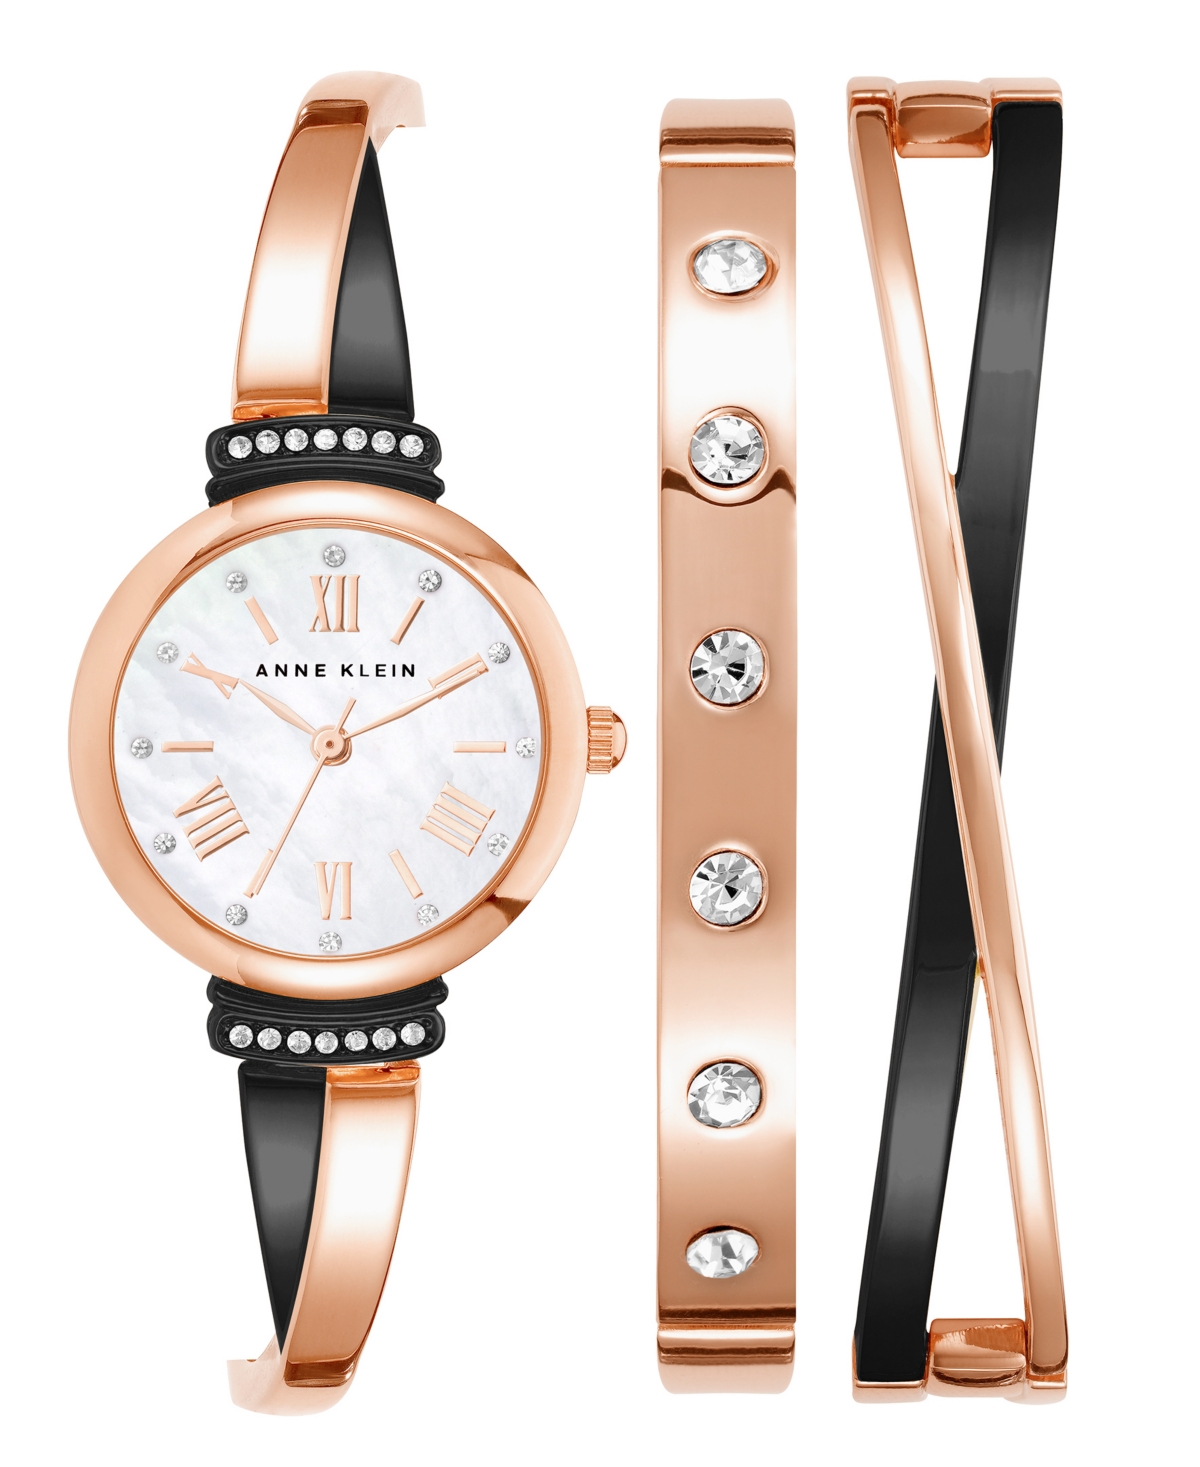 Anne Klein Women's Rose Gold-tone And Black Alloy Bangle With Crystal Accents Fashion Watch 33mm Set 3 Pieces In Rose Gold-tone,black